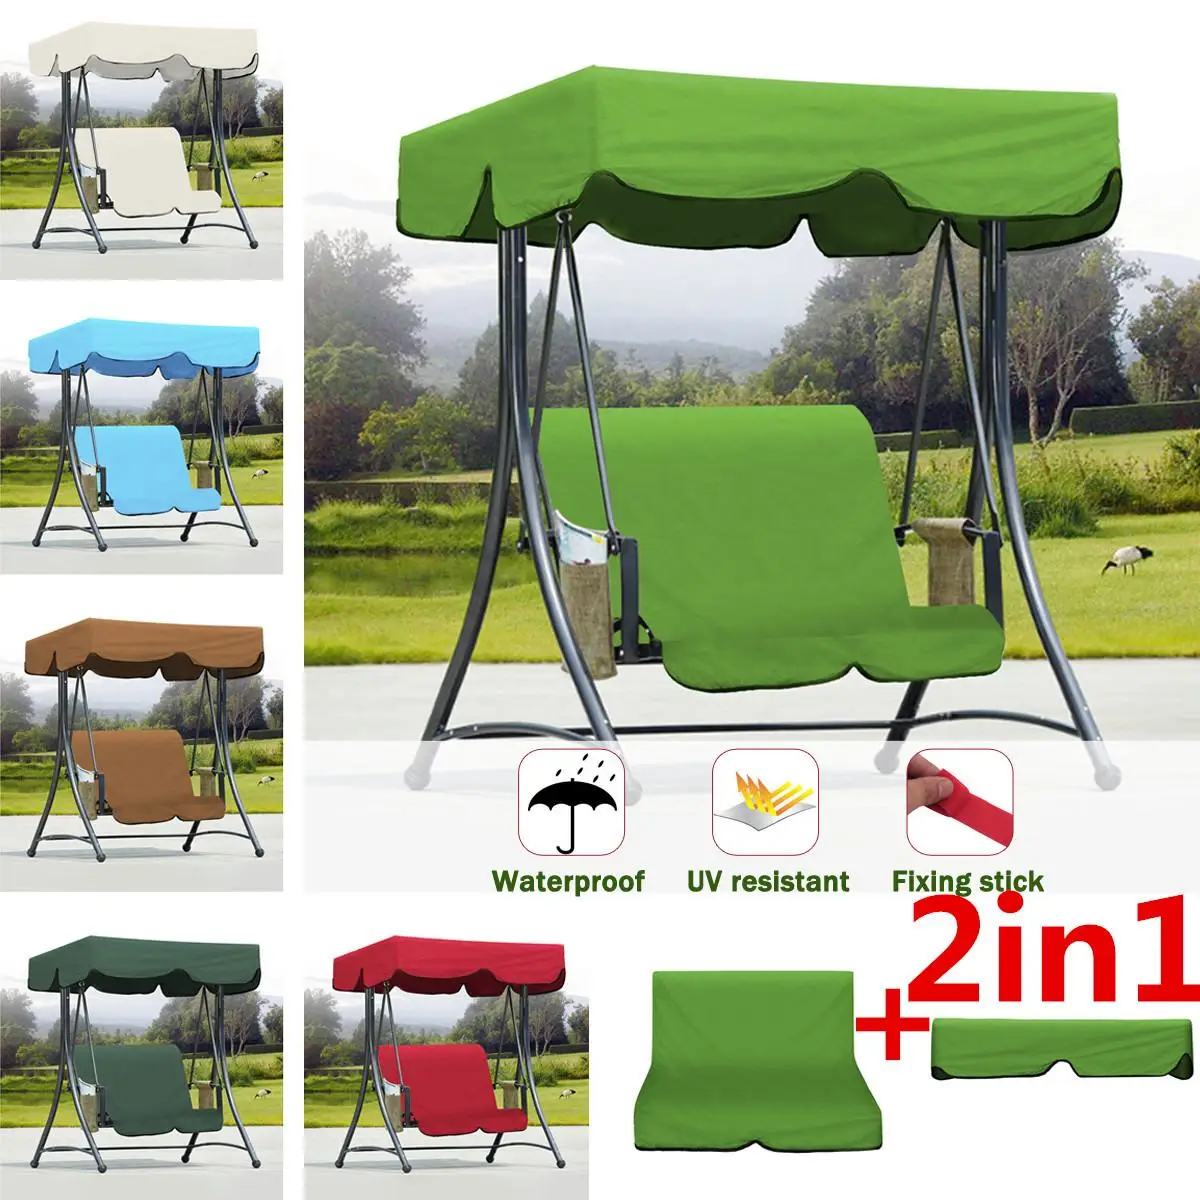 

Waterproof Top Cover Canopy Replacement Summer for Garden Courtyard Ourdoor Swing Chair Hammock Canopy + 2 Chair Cushion Cover